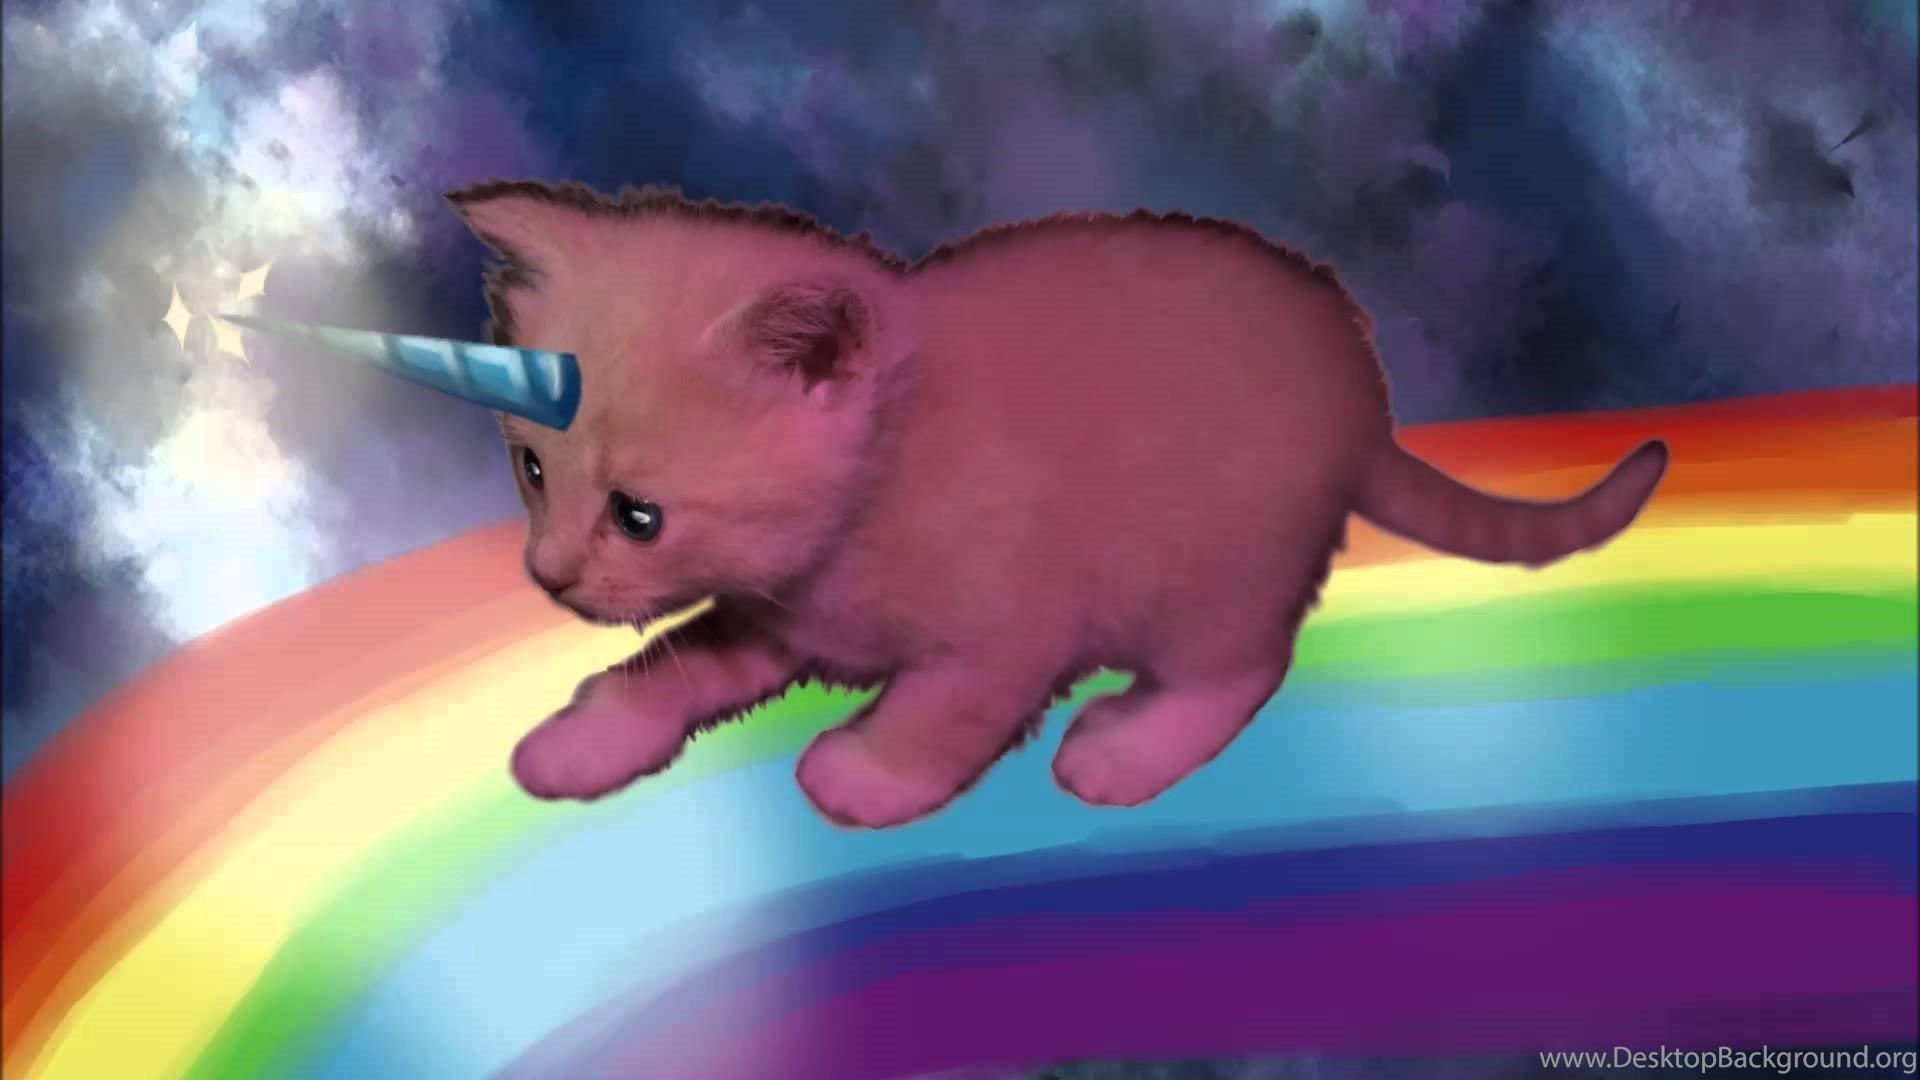 Pink Fluffy Unicorns Dancing On Rainbows Wallpapers